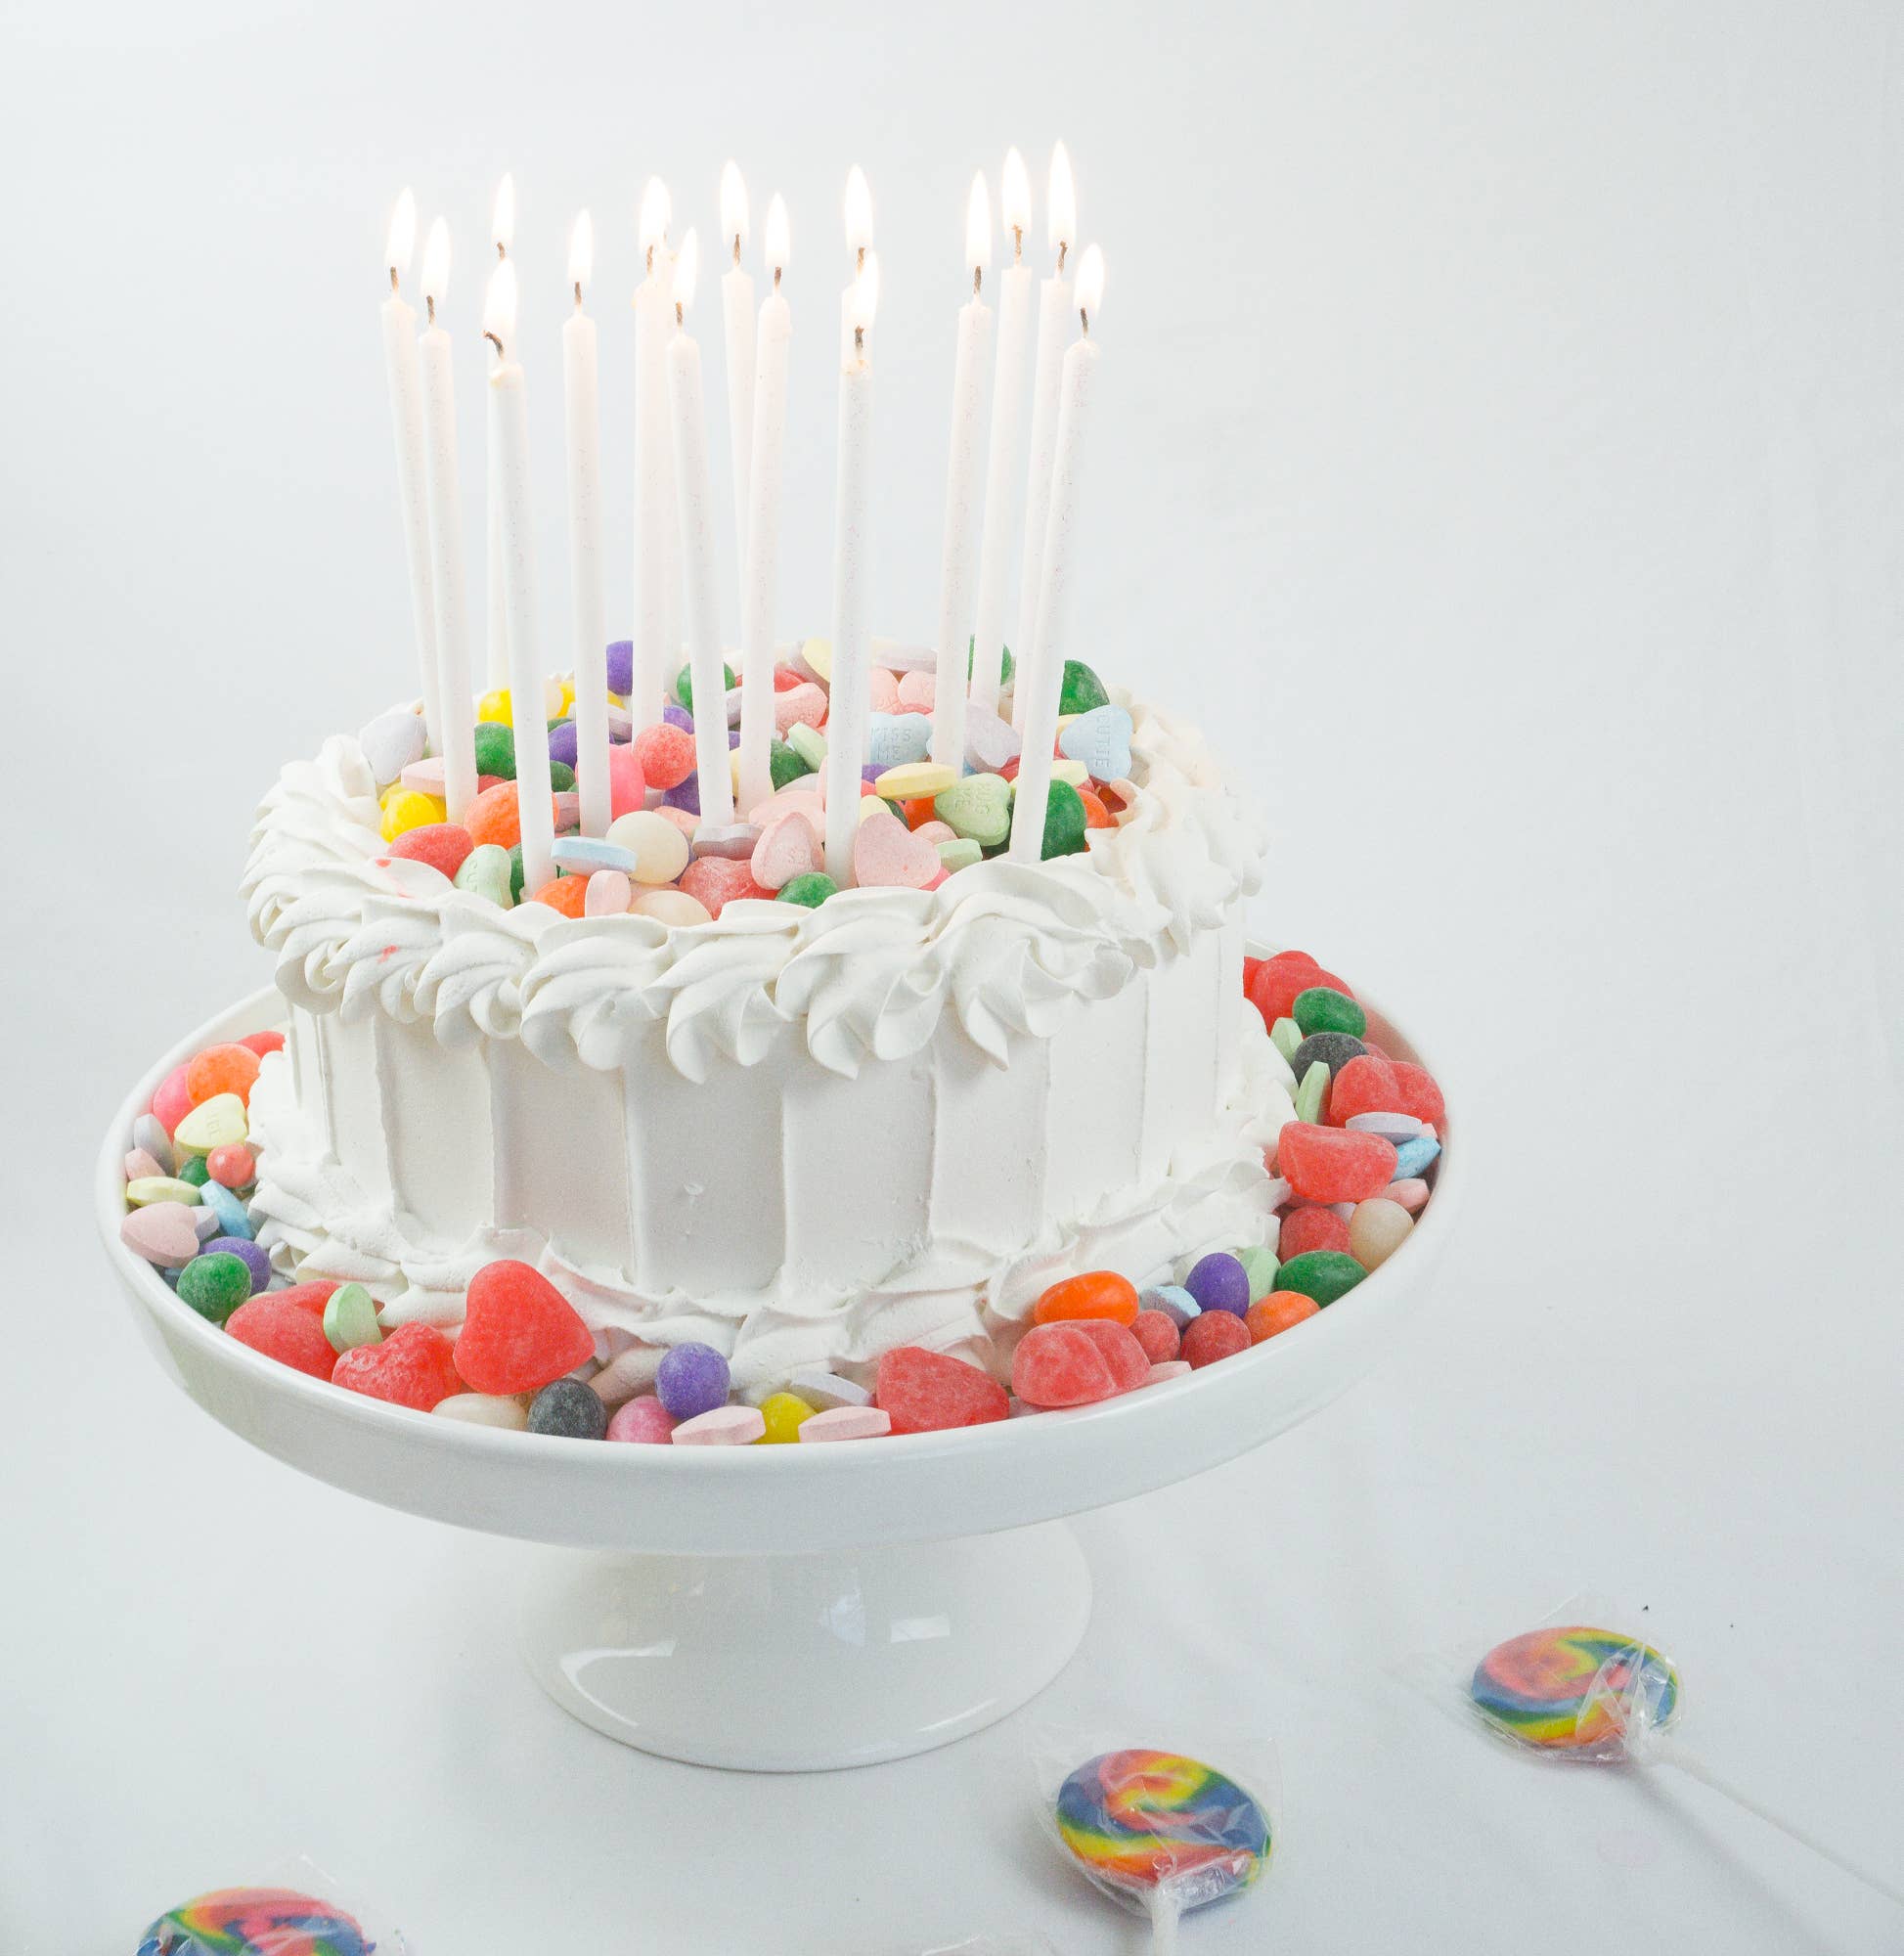 Tall White Glitter Birthday Candle Set - 16 pack